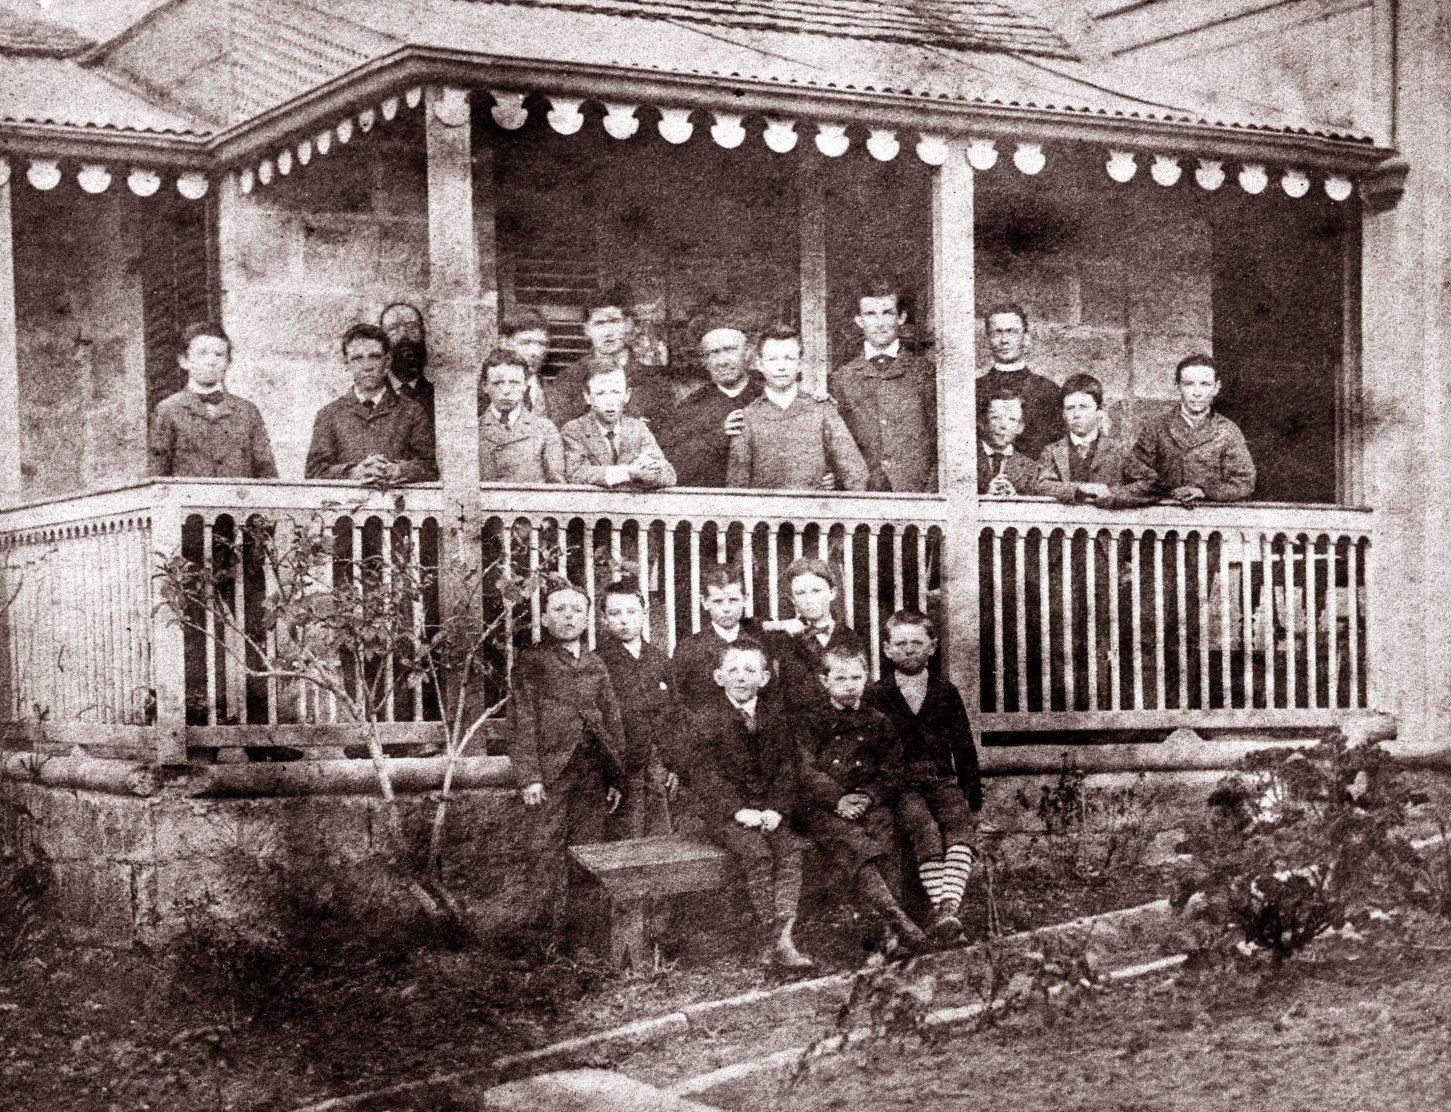 Mark Sheldon (front row, right) aged 8 on the verandah of Riverview cottage in 1880 with Fr Dalton SJ, staff and students. Source: Jubilee Book 1880-1930 pages 8-9, St Ignatius College Riverview. 